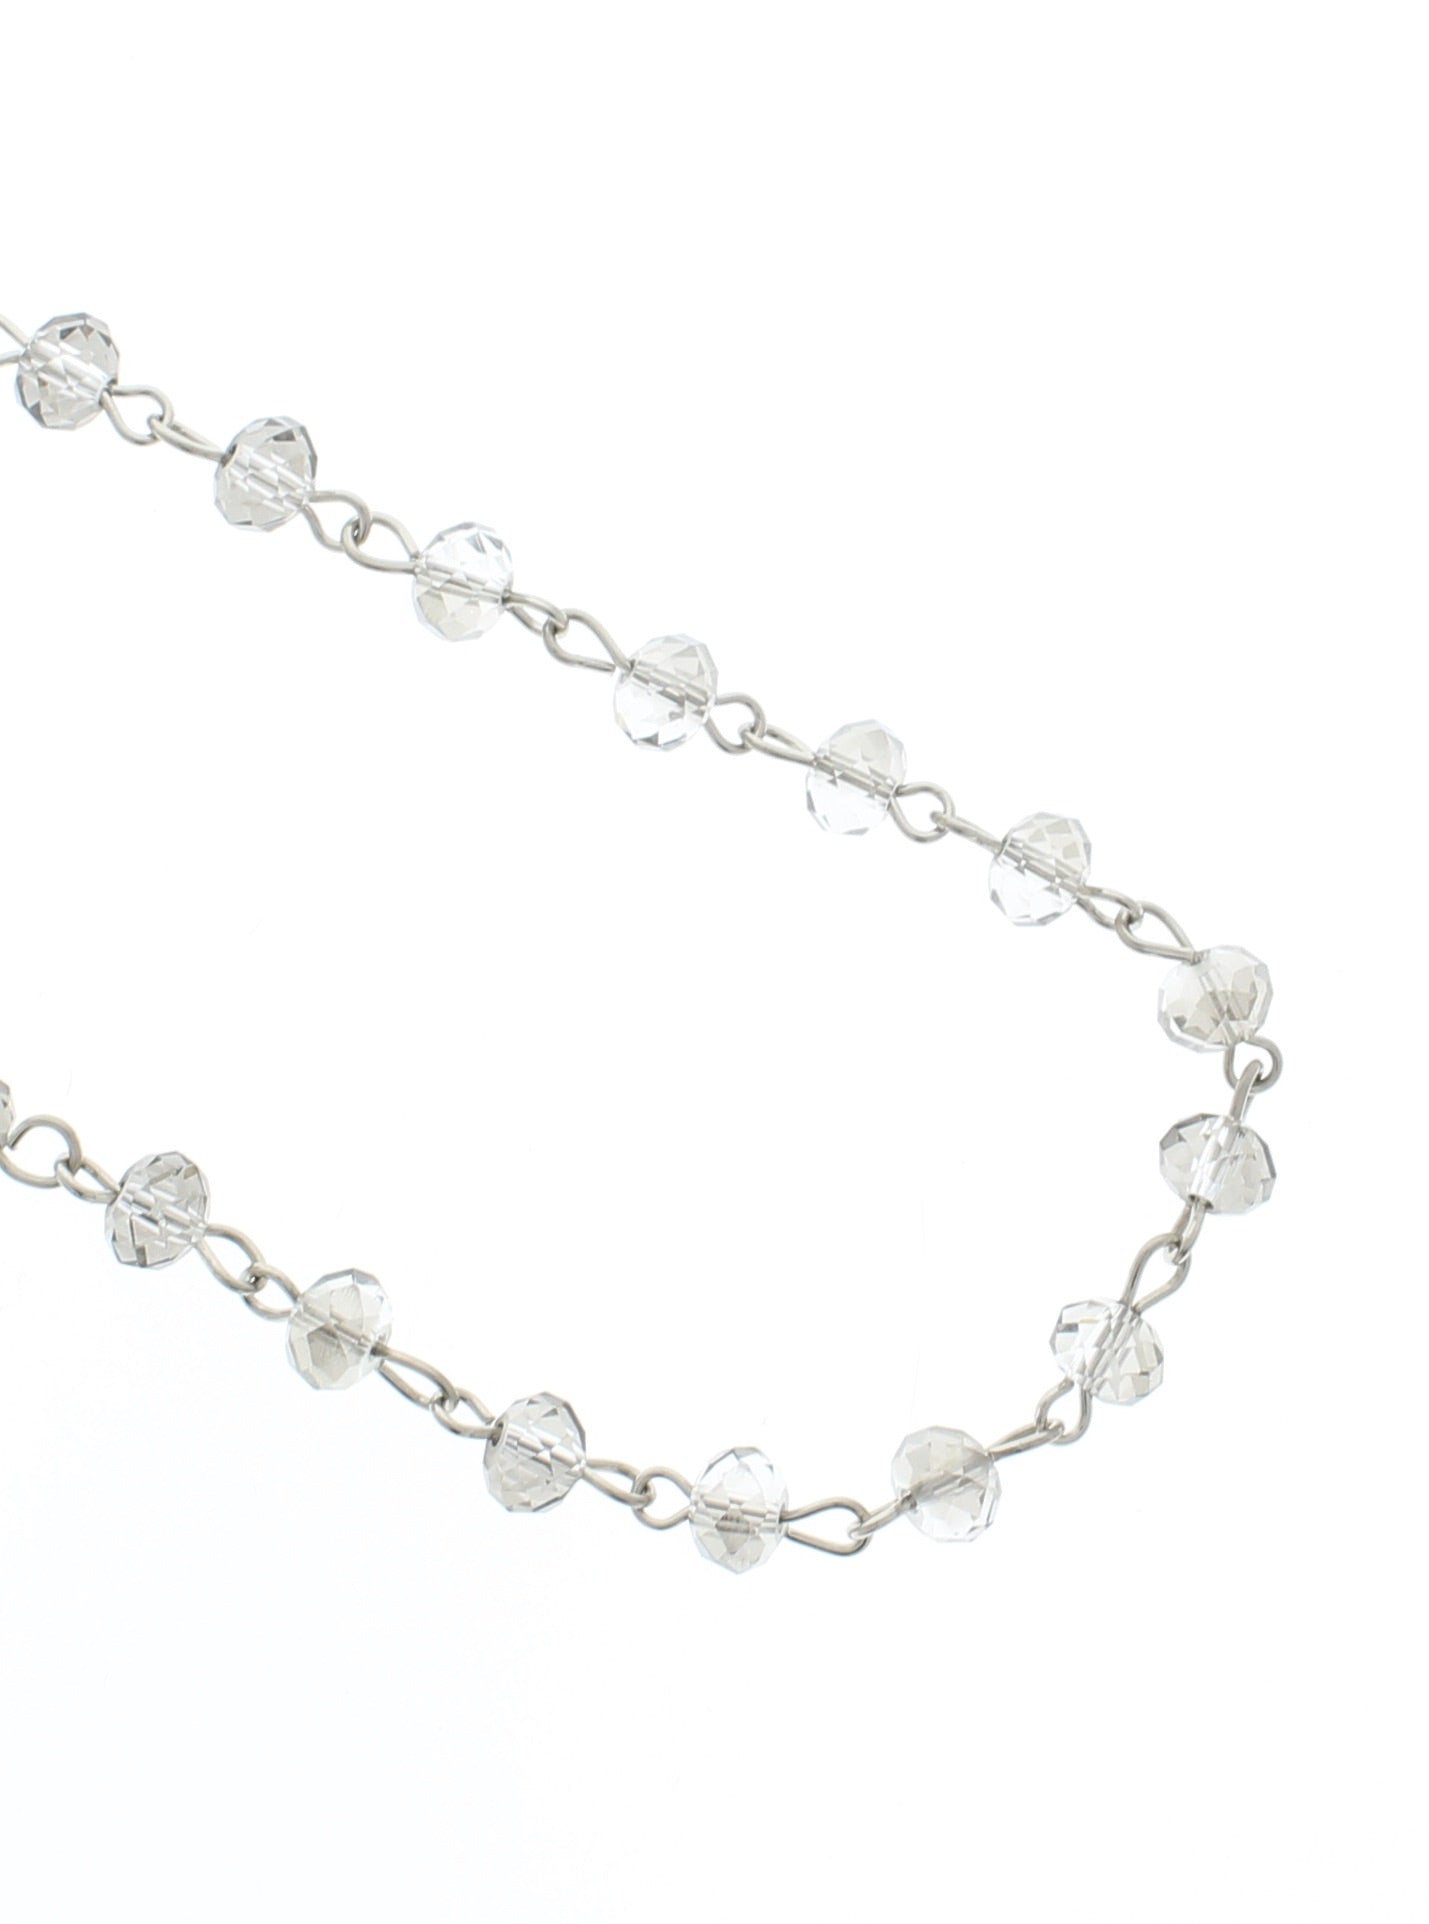 6mm Faceted Smokey Crystal Beaded Link Chain, Rosary Chain, sold by the foot